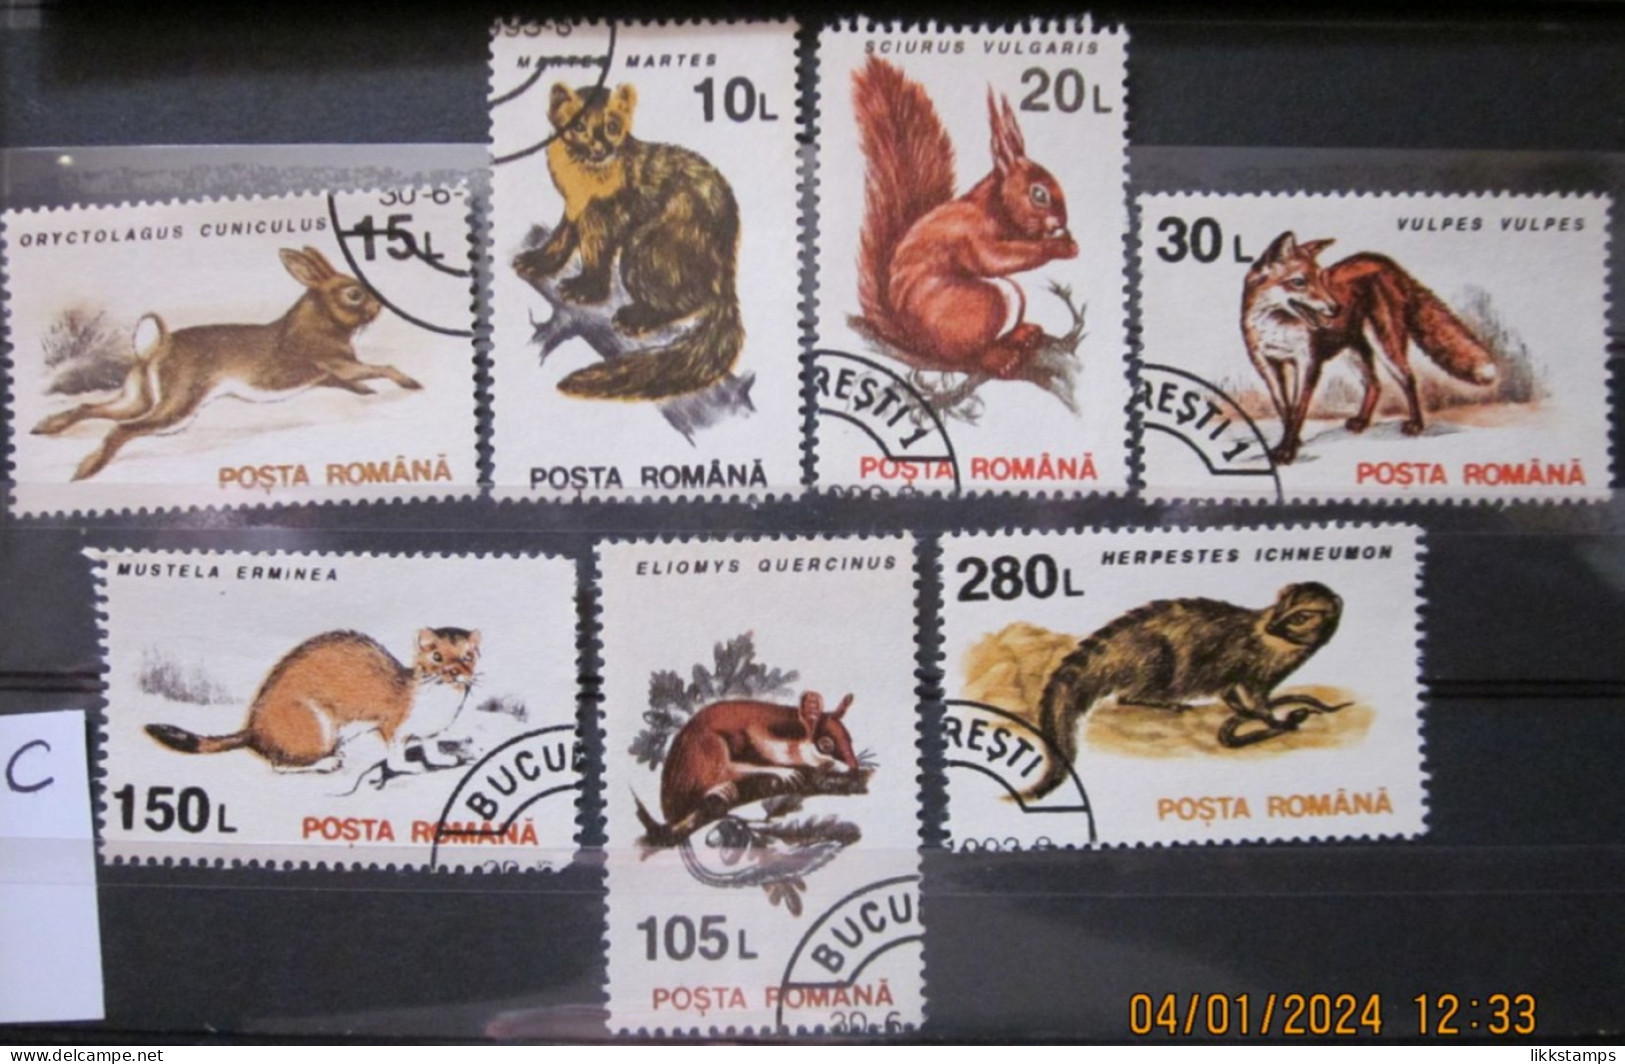 ROMANIA ~ 1993 ~ S.G. NUMBERS 5533 - 5535 + 5537 + 5540 - 5542. ~ 'LOT C' ~ MAMMALS ~ VFU #03571 - Used Stamps